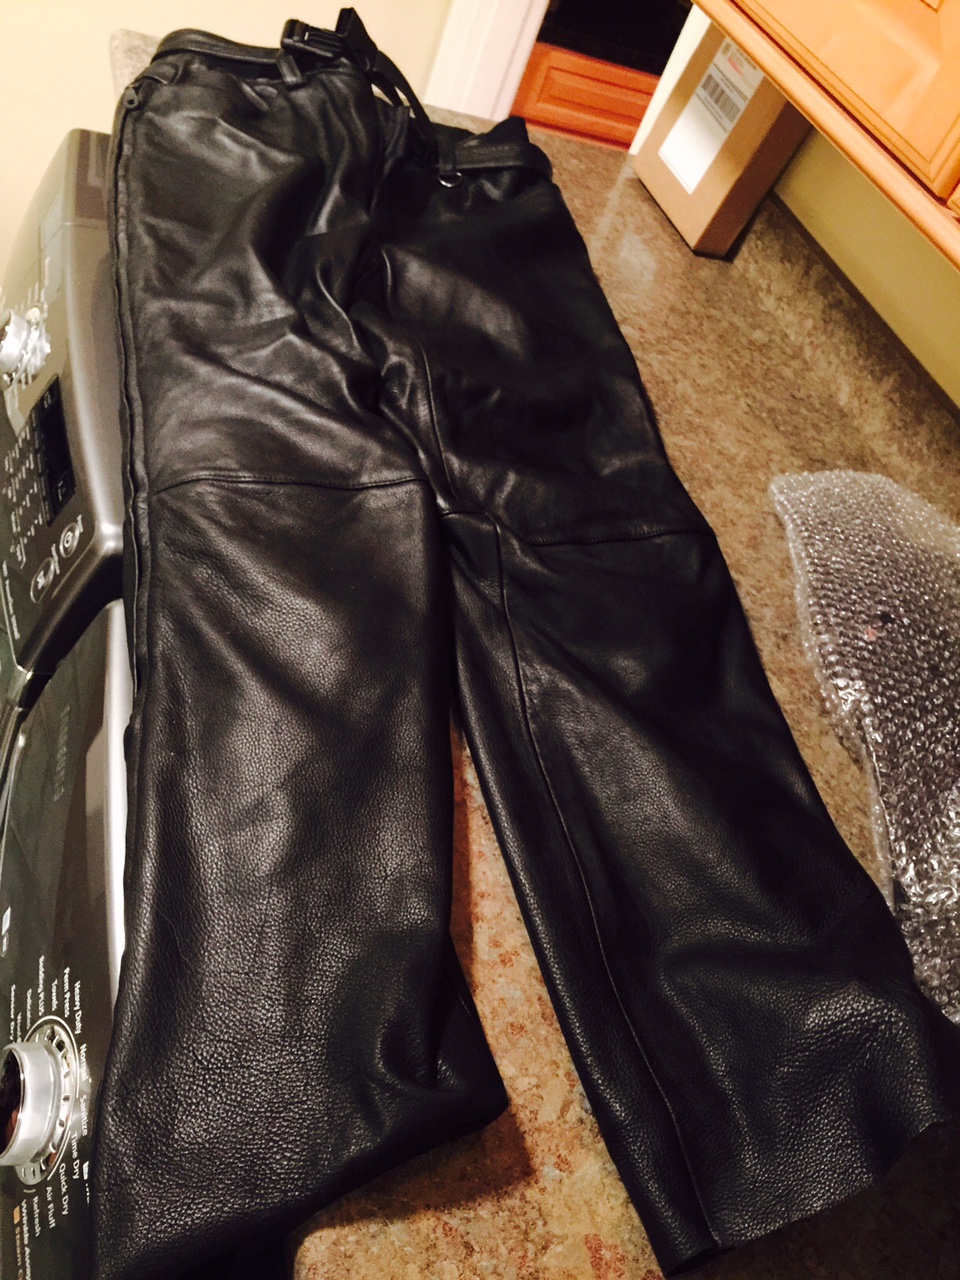 https://www.hdforums.com/forum/attachments/gear-and-other-items-for-sale/482290d1471518757-harley-fxrg-leather-pant-fullsizerender-3-.jpg